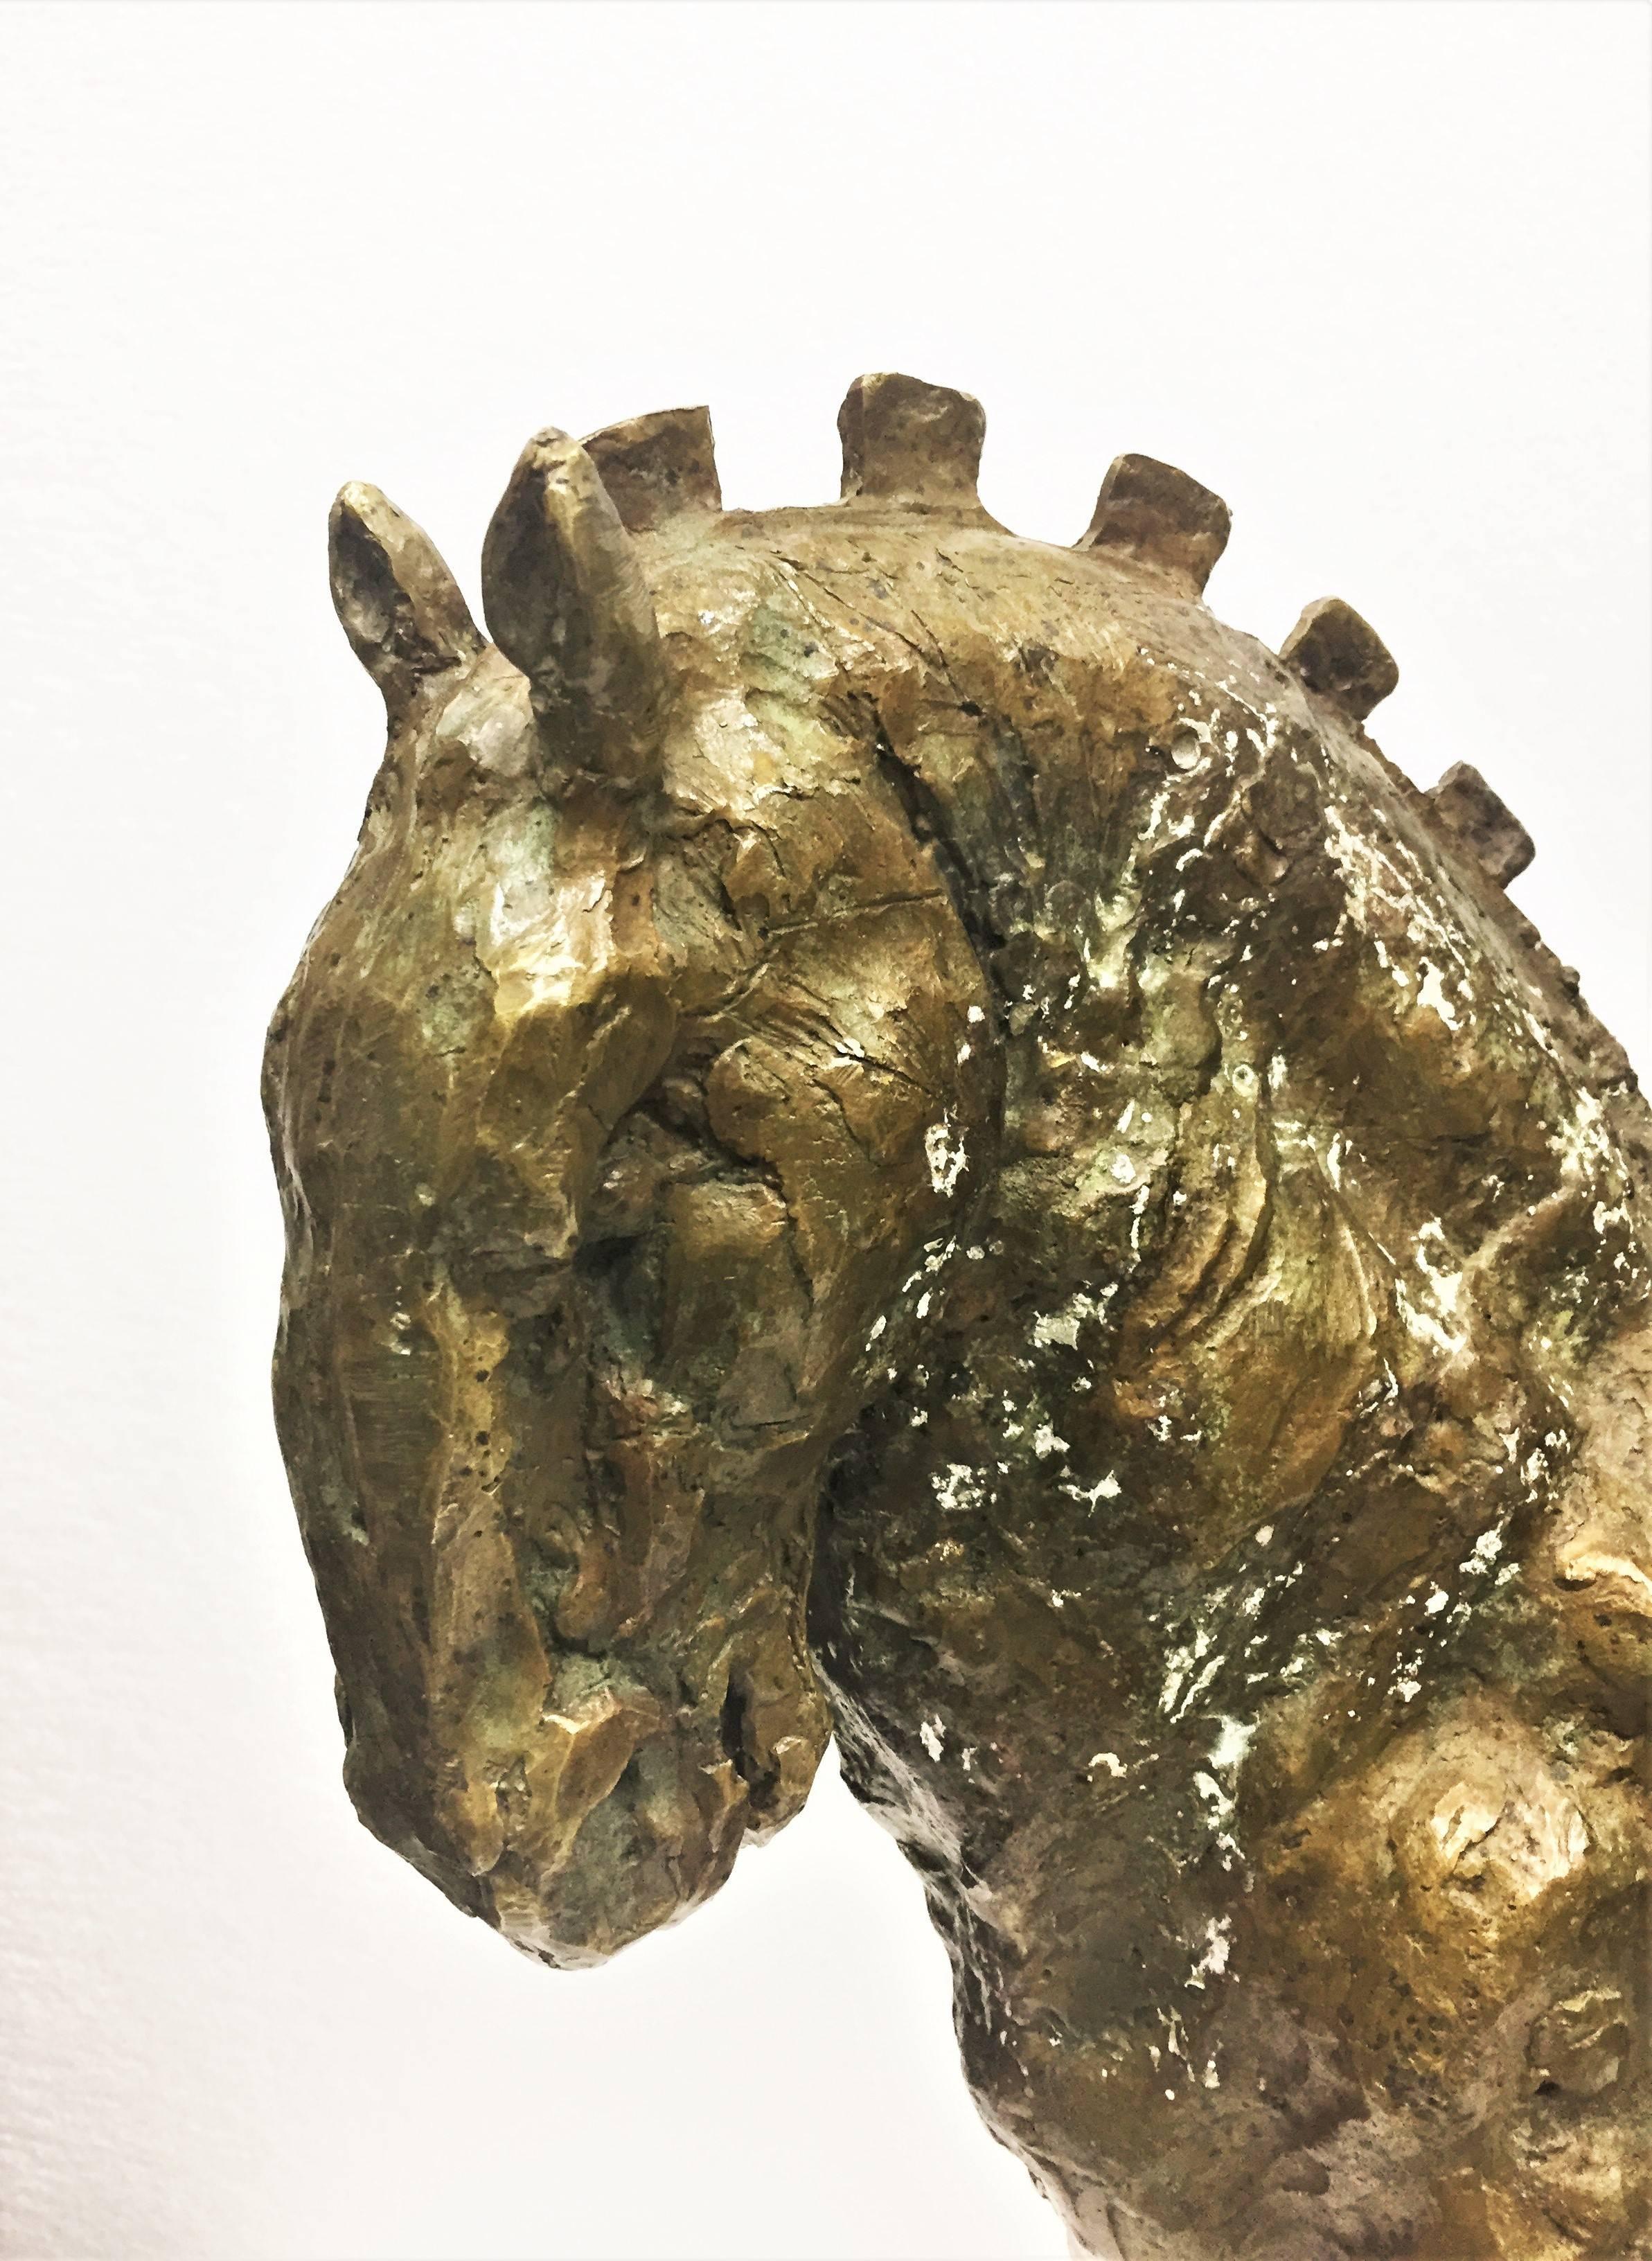 Hombre a Caballo, circa 1998
Bronze sculpture with light verdigris-type patina. Inscribed twice: Javier Marin - on equestrian’s left shoulder and on horse's right rump. 

Javier Marin (Mexican, b.1962), a world-famous Mexican artist was born in